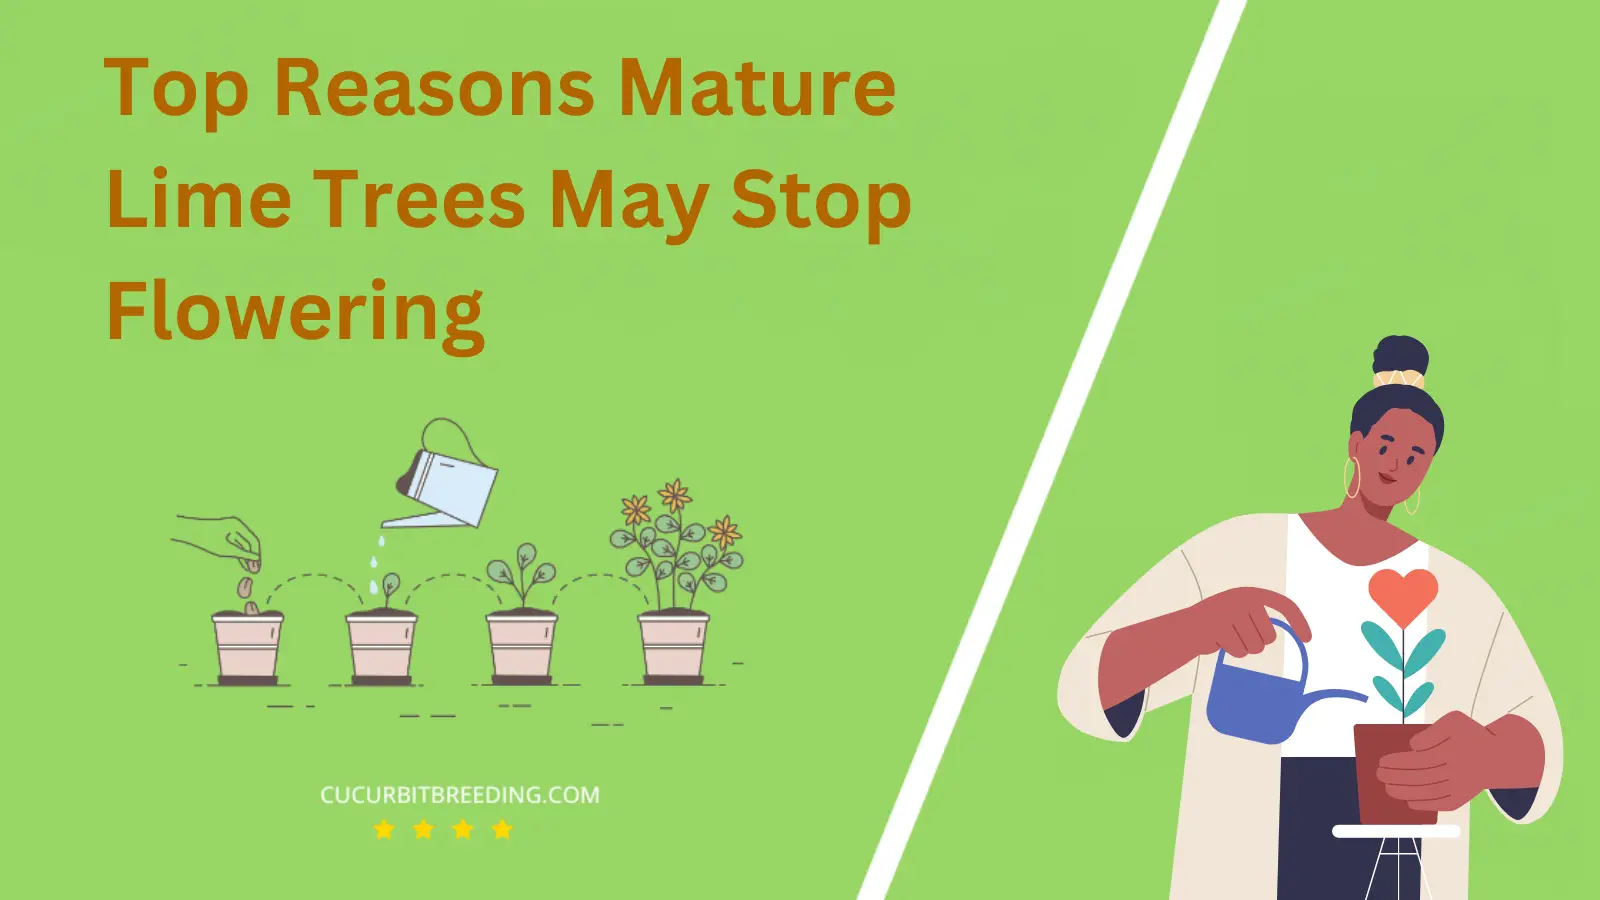 Top Reasons Mature Lime Trees May Stop Flowering